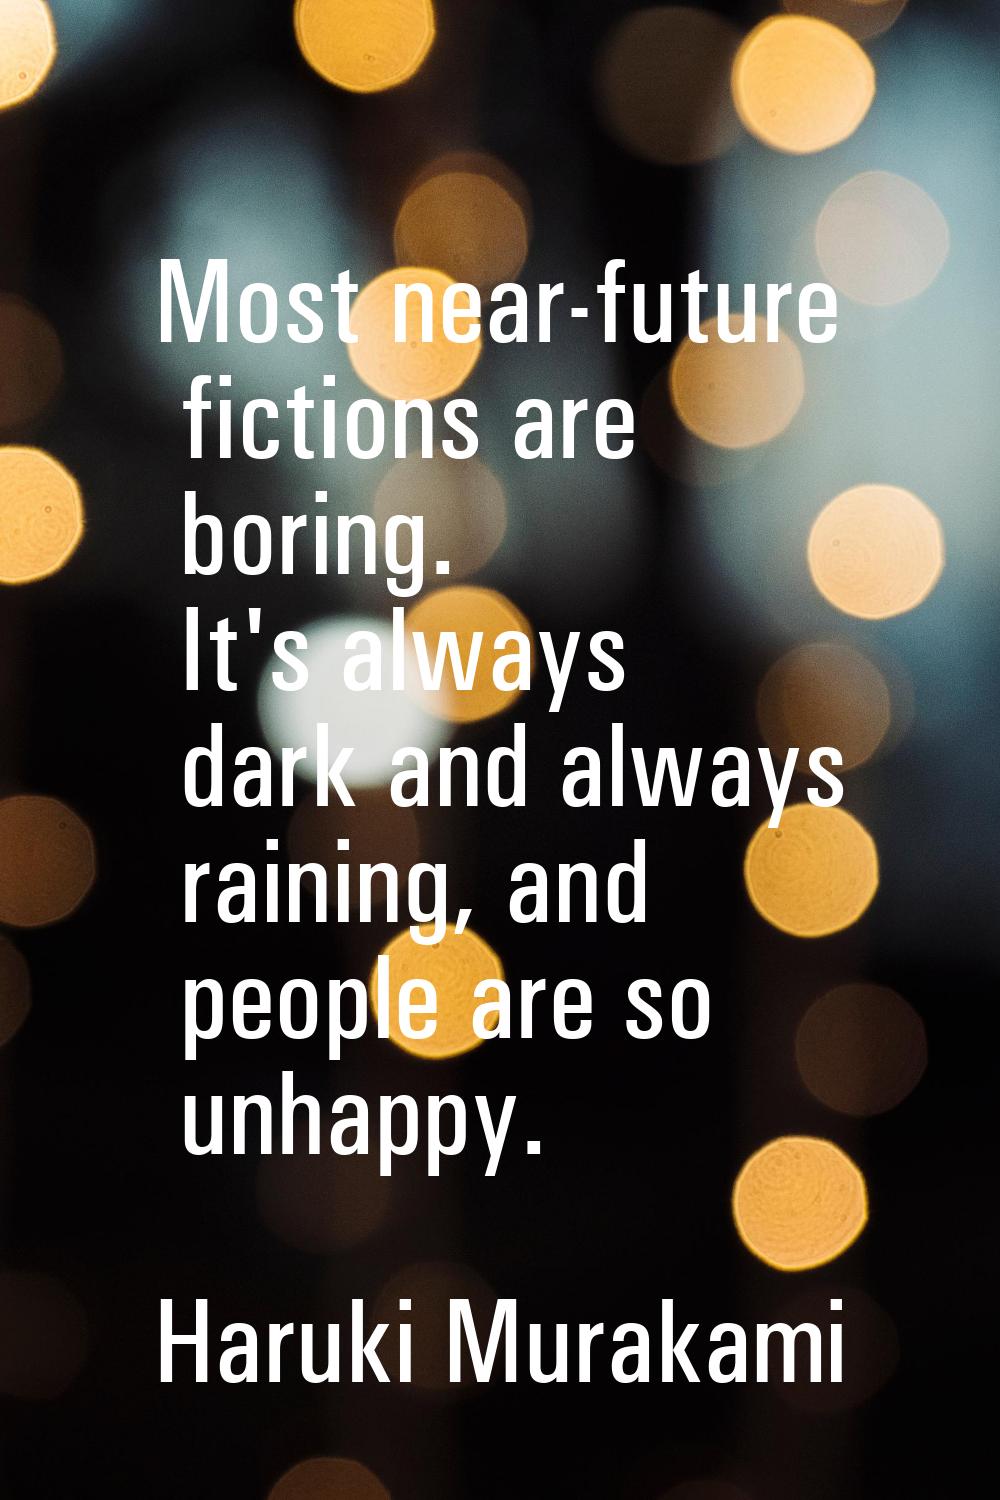 Most near-future fictions are boring. It's always dark and always raining, and people are so unhapp